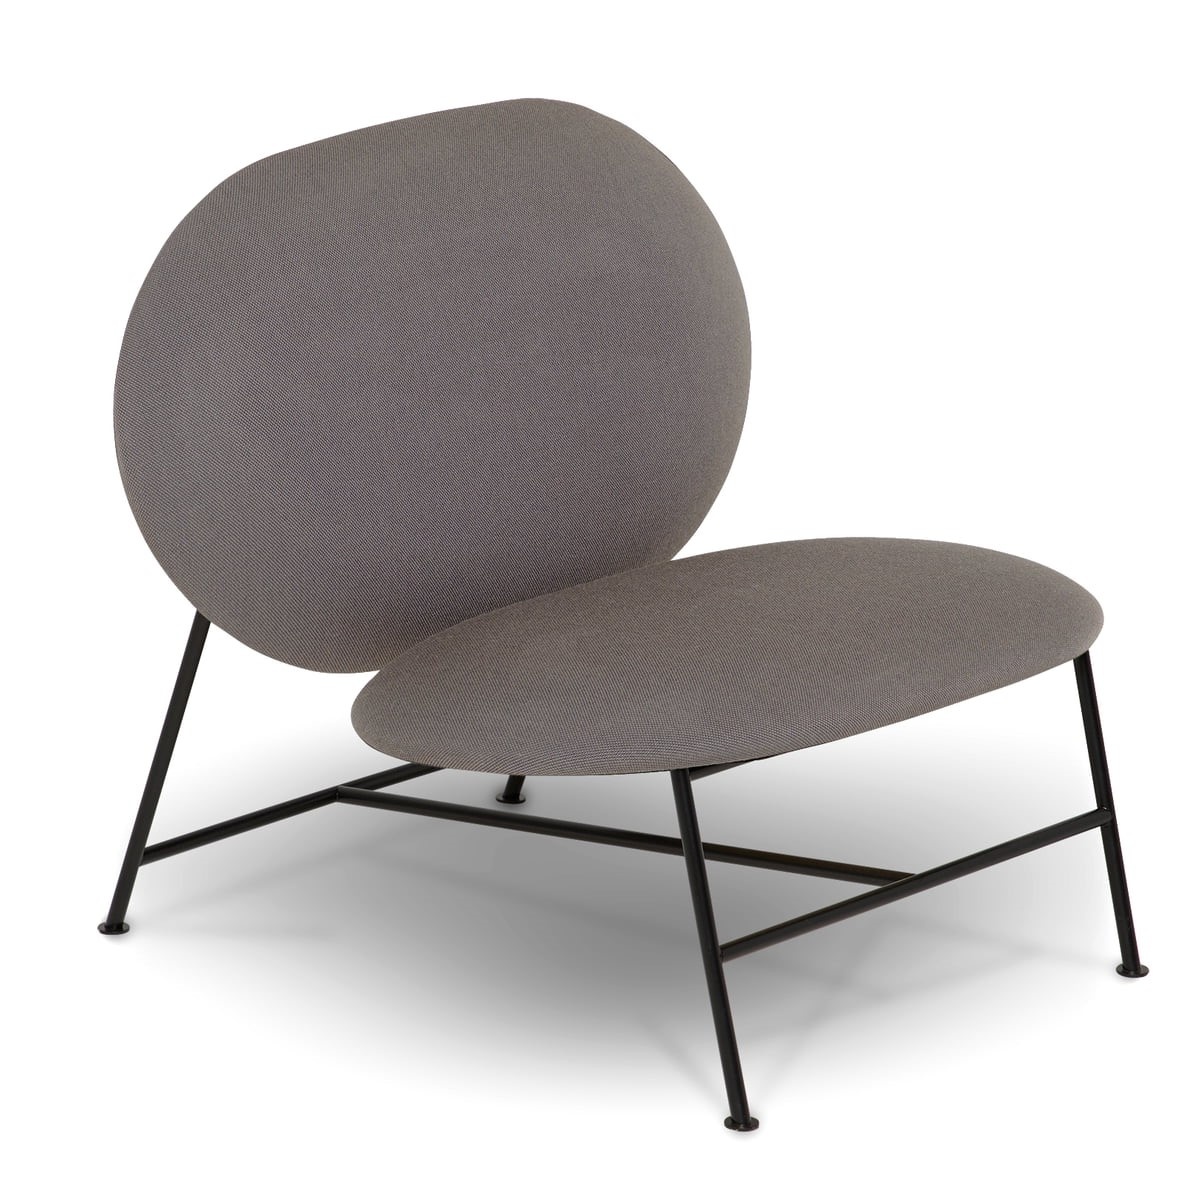 NORTHERN OBLONG LOUNGE CHAIR